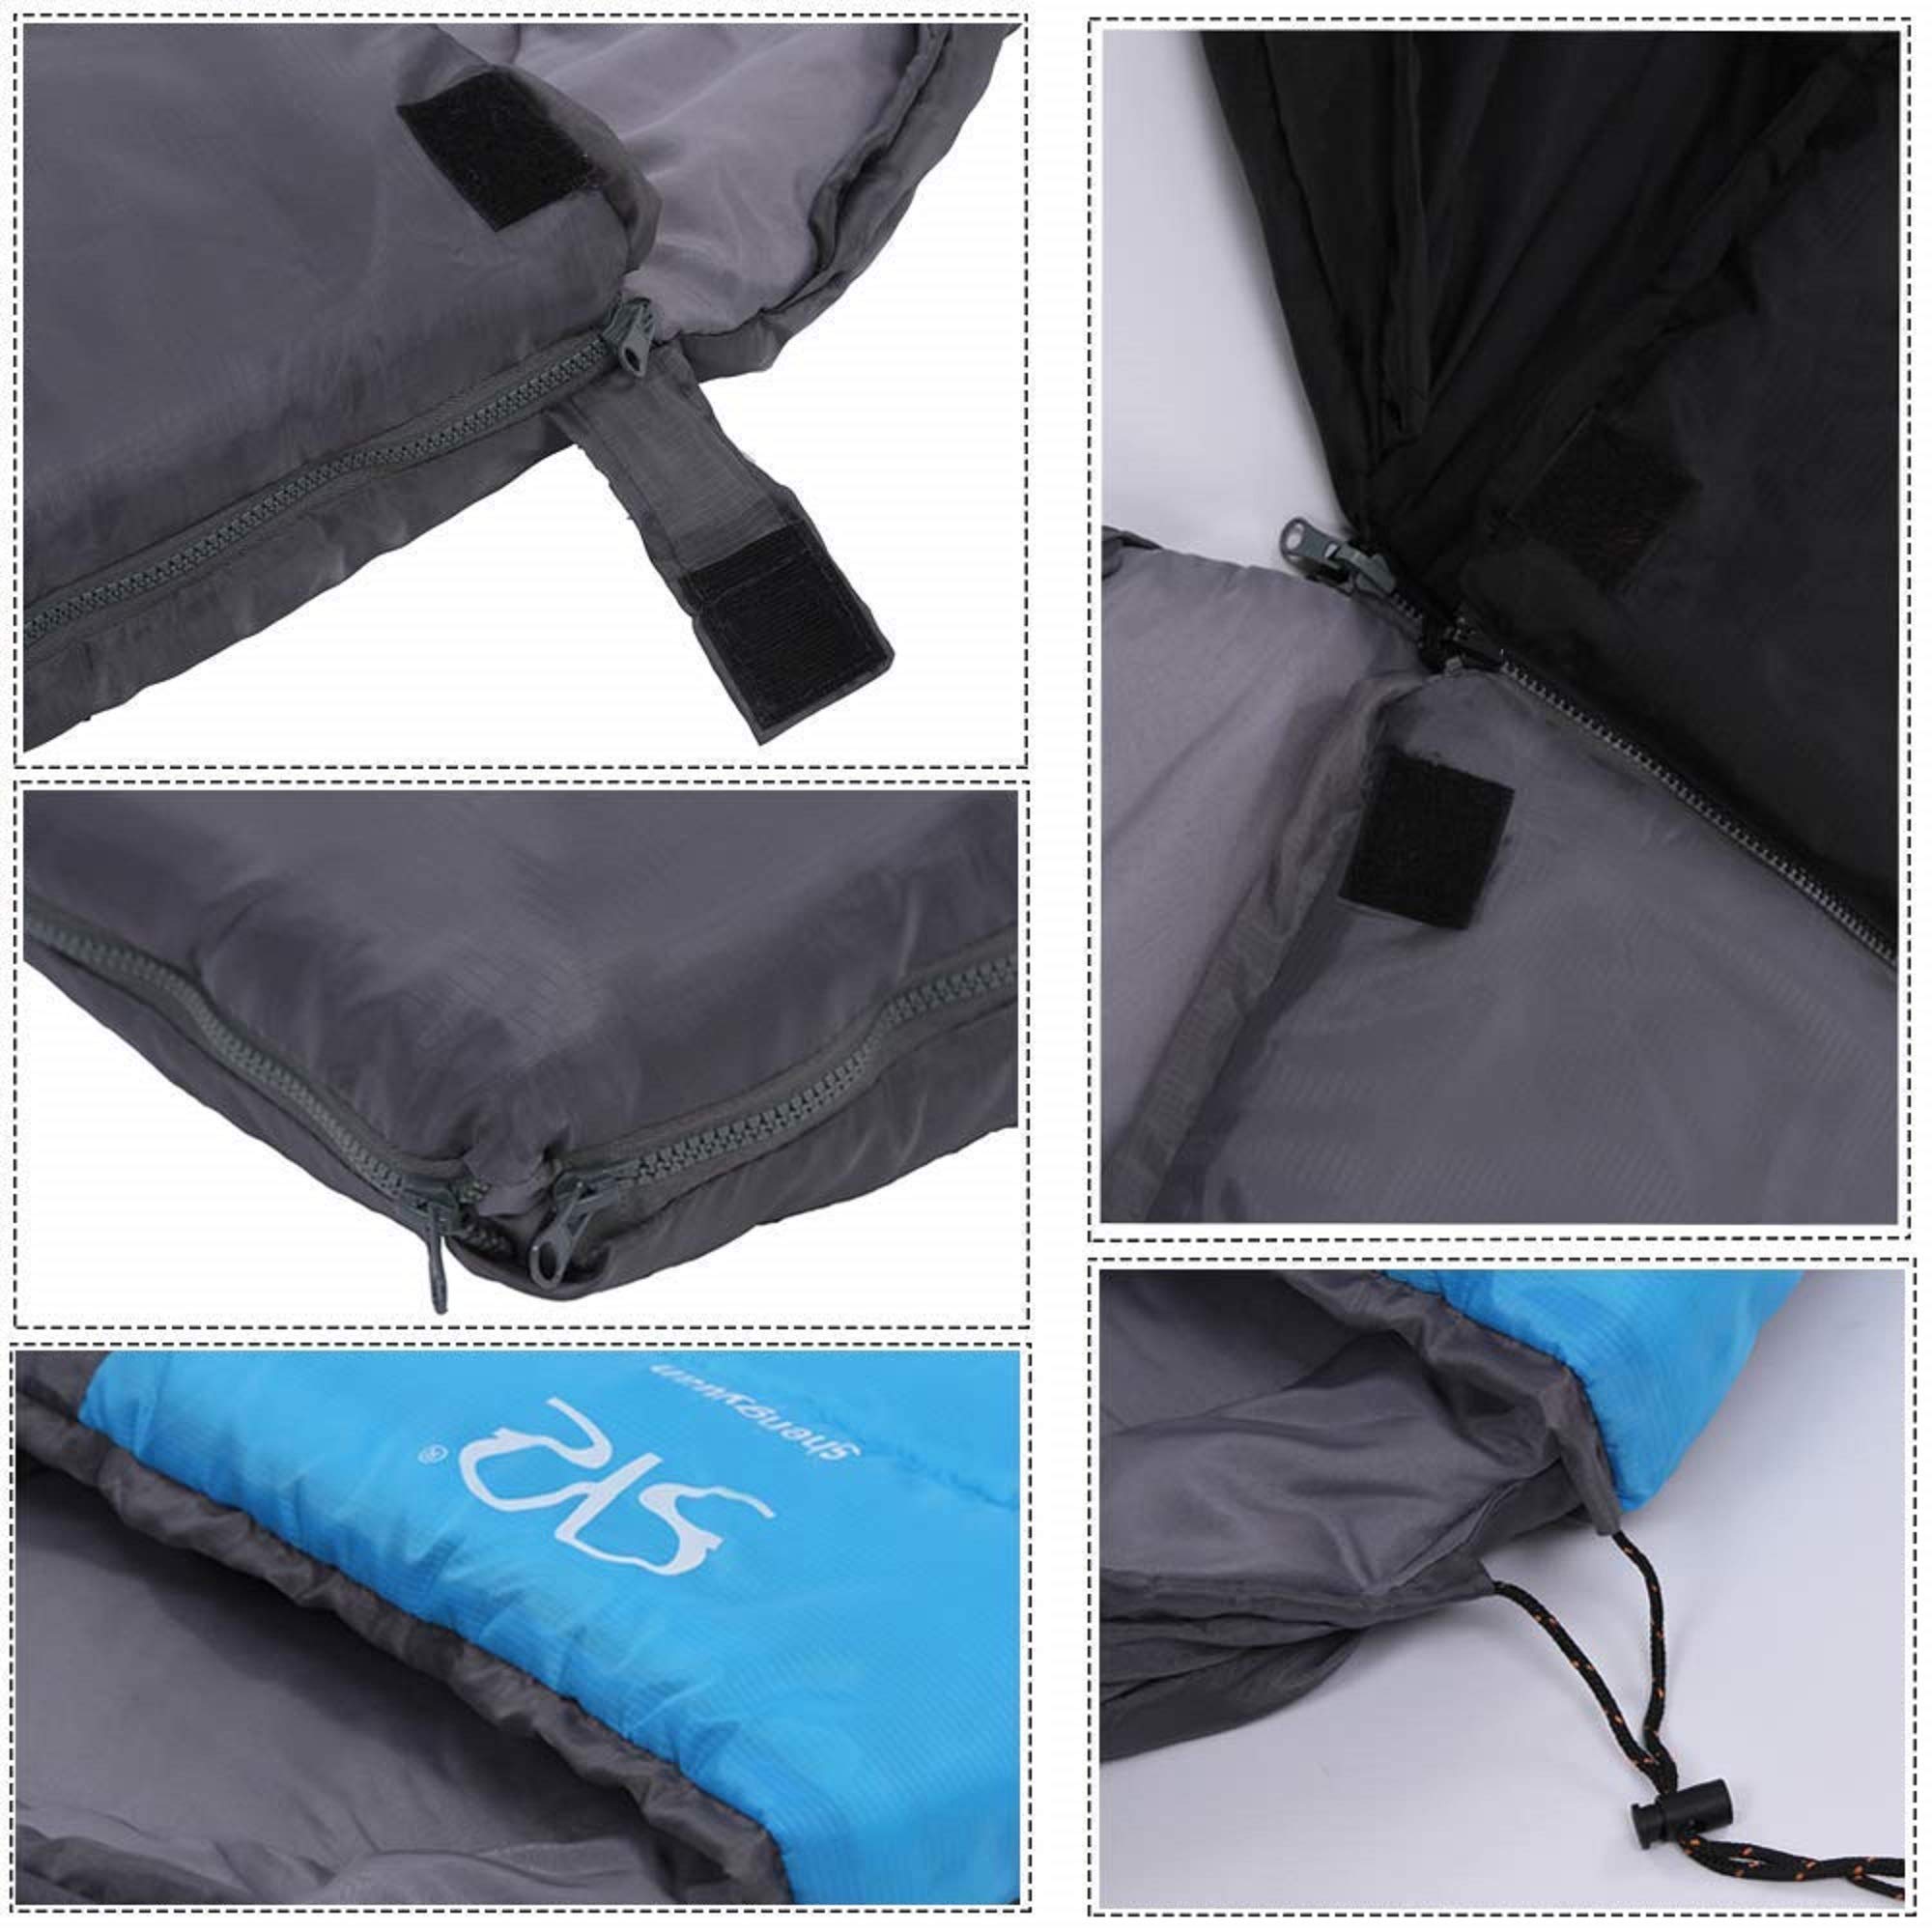 (Out of Stock) Lightweight Portable Waterproof Insulation Sleeping Bag Suit, Blue